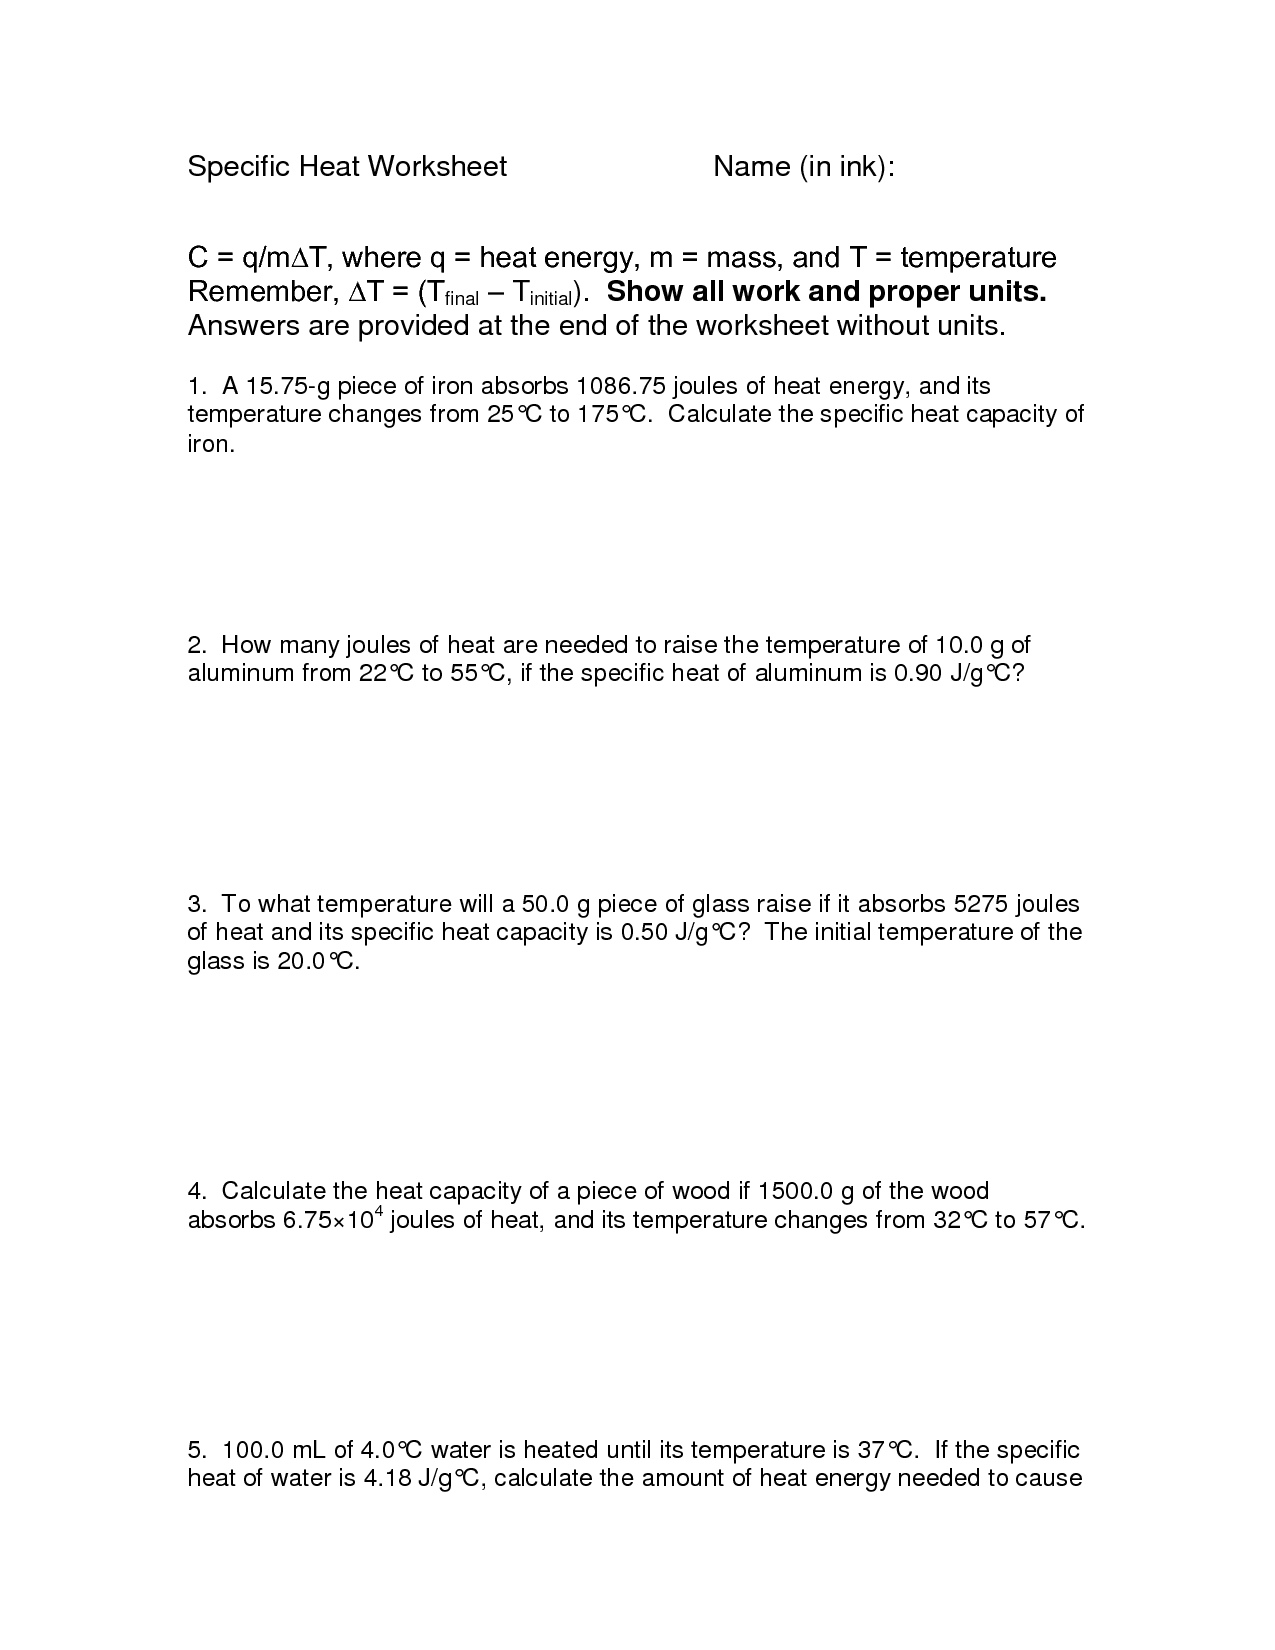 Specific Heat Calculations Worksheet Answers Image